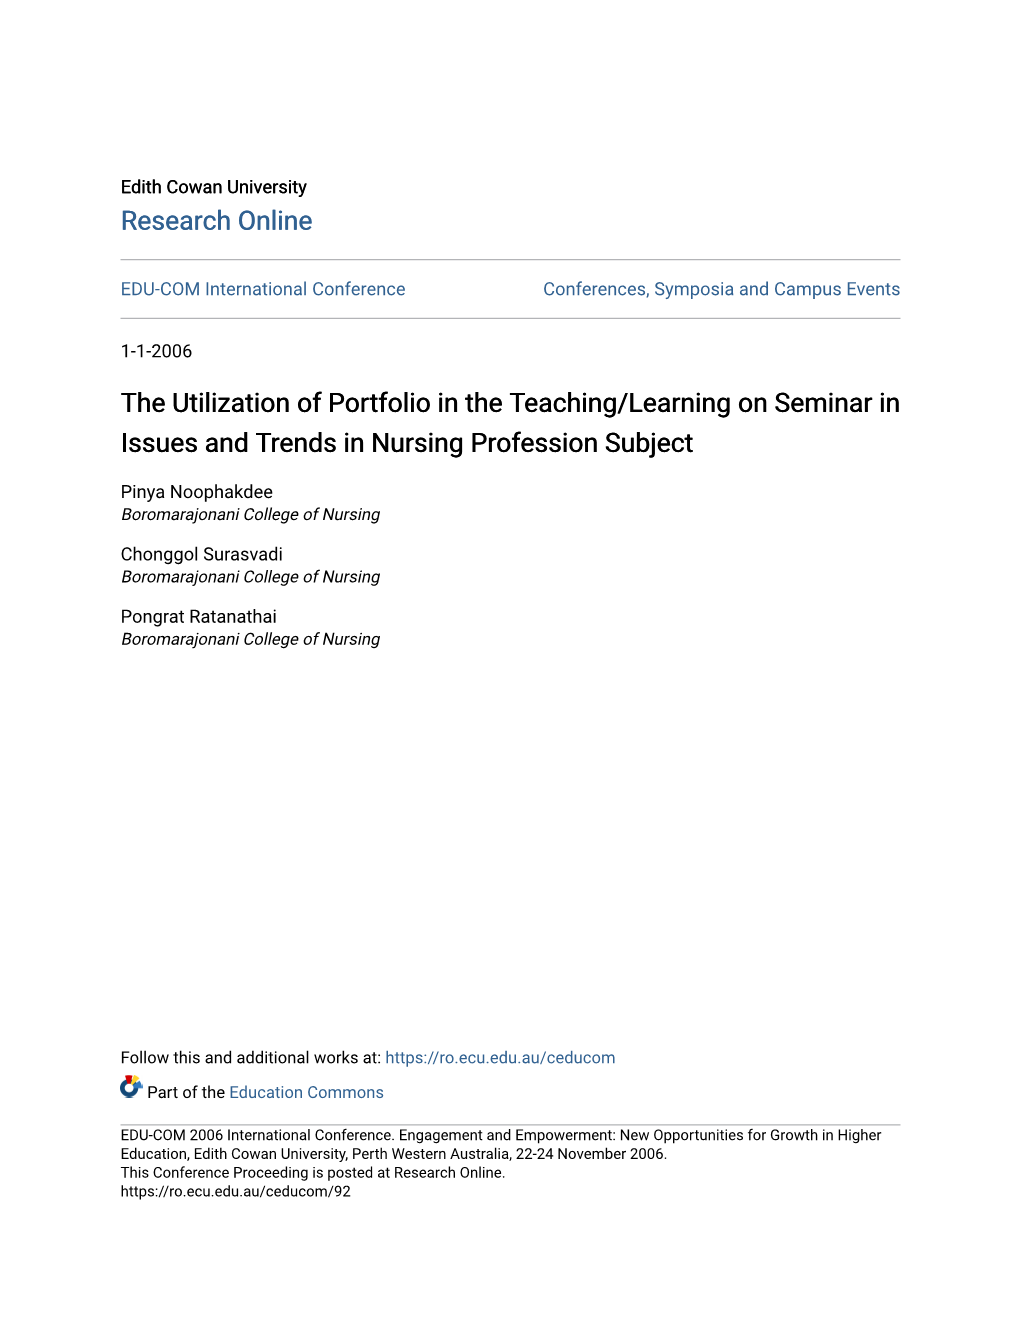 The Utilization of Portfolio in the Teaching/Learning on Seminar in Issues and Trends in Nursing Profession Subject